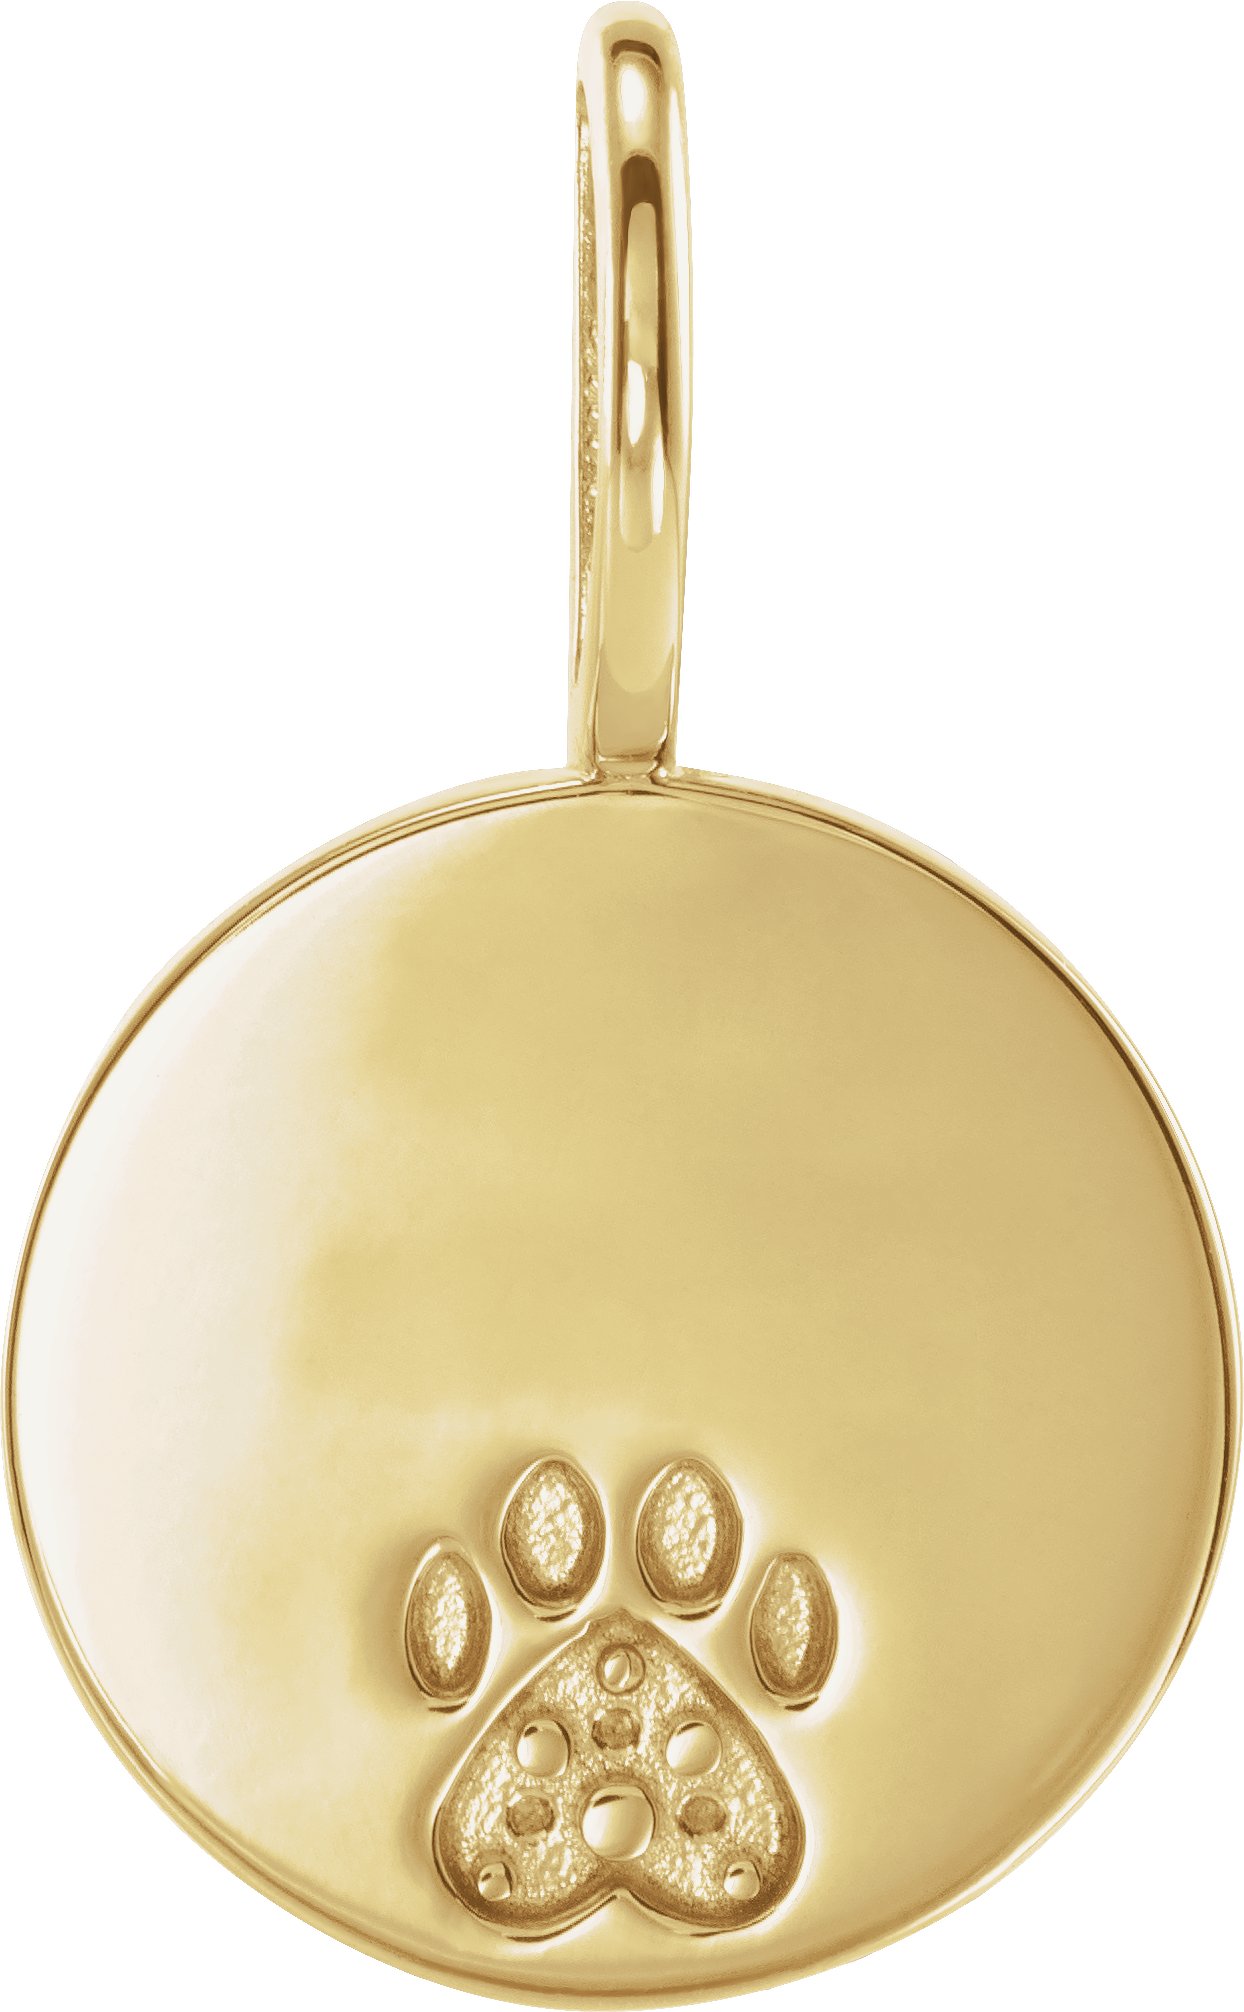 14K Yellow Engravable Accented Paw Print Pendant Mounting